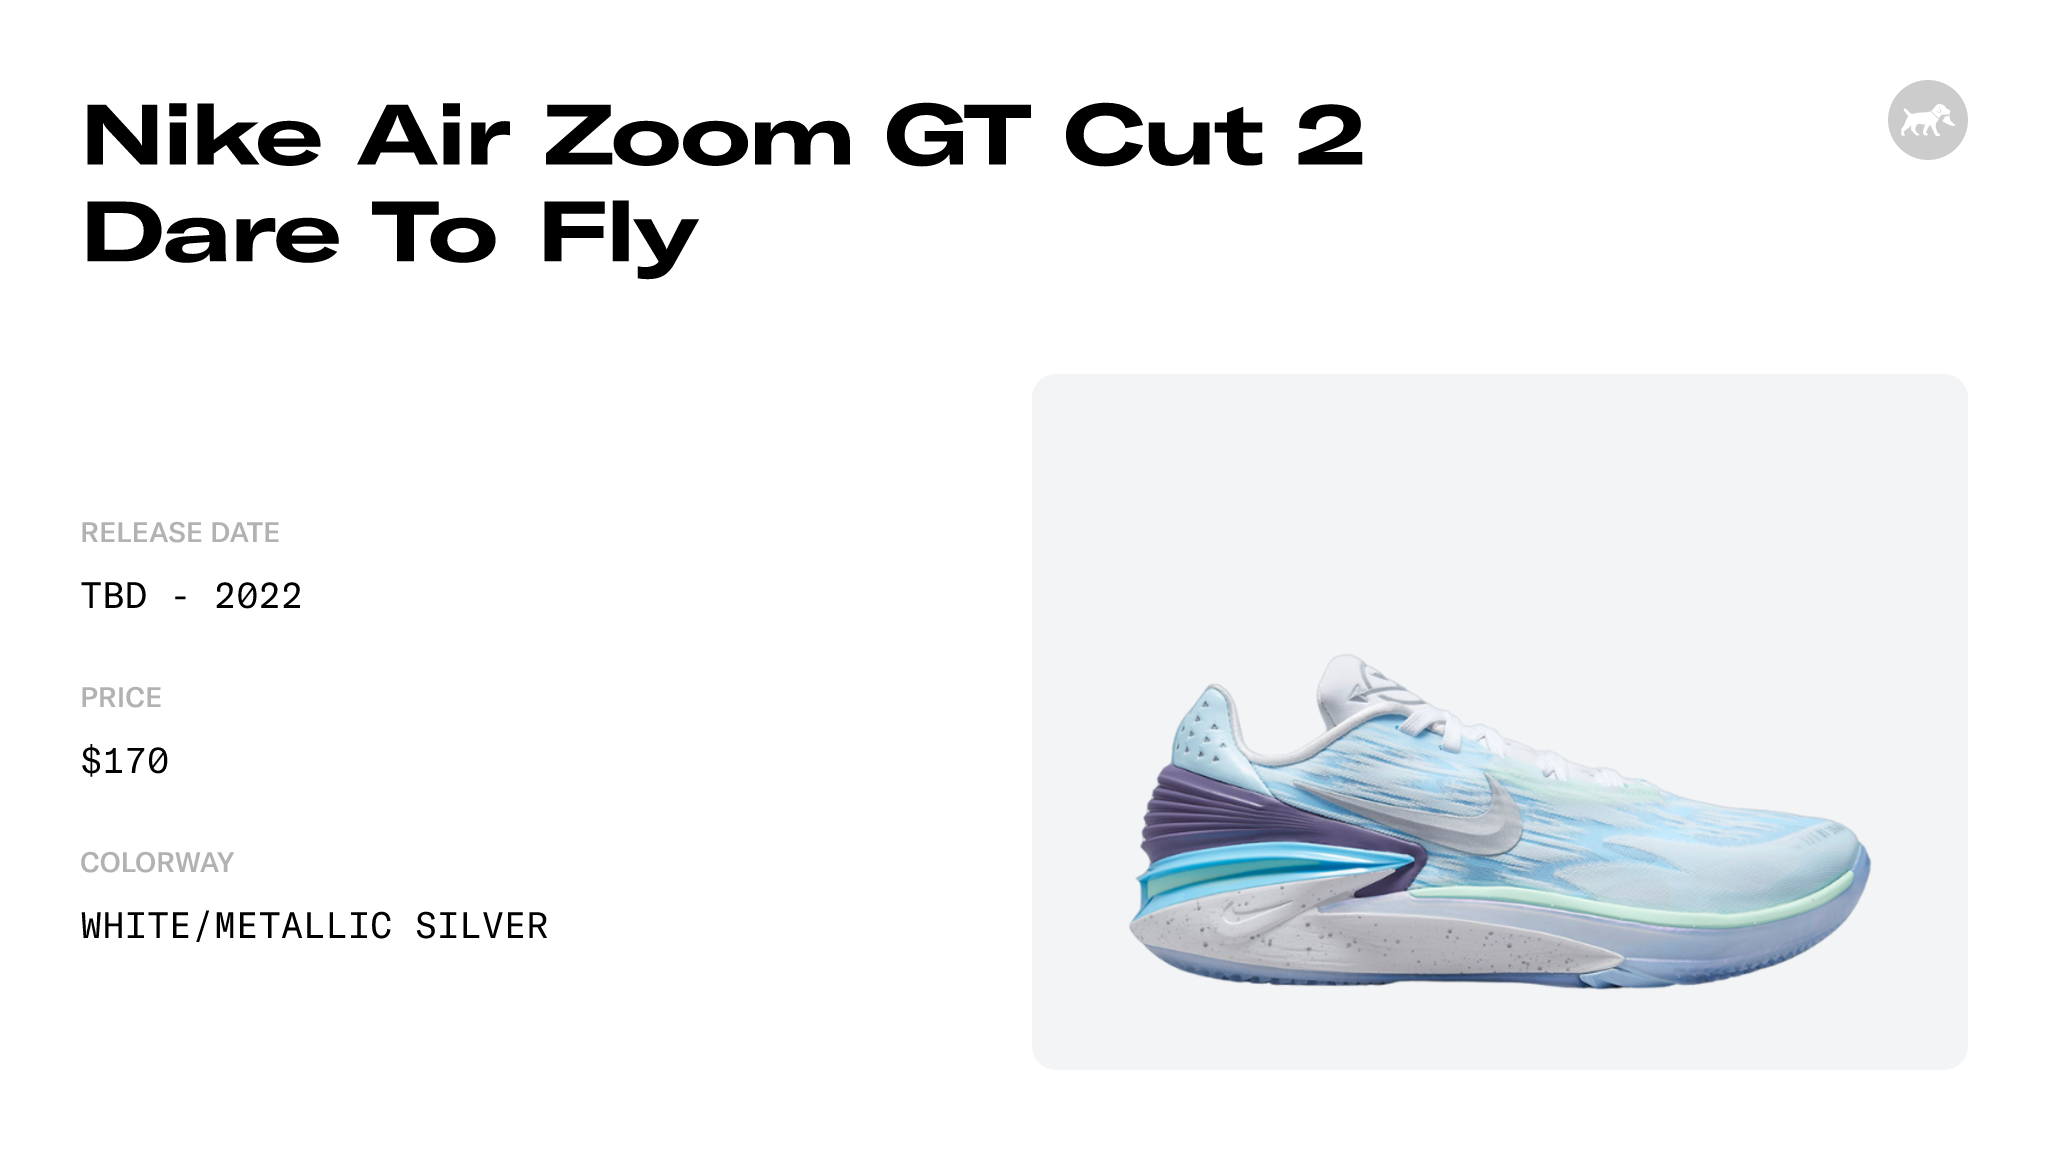 Nike Air Zoom GT Cut 2 Dare To Fly - FB1866-101 Raffles and Release Date